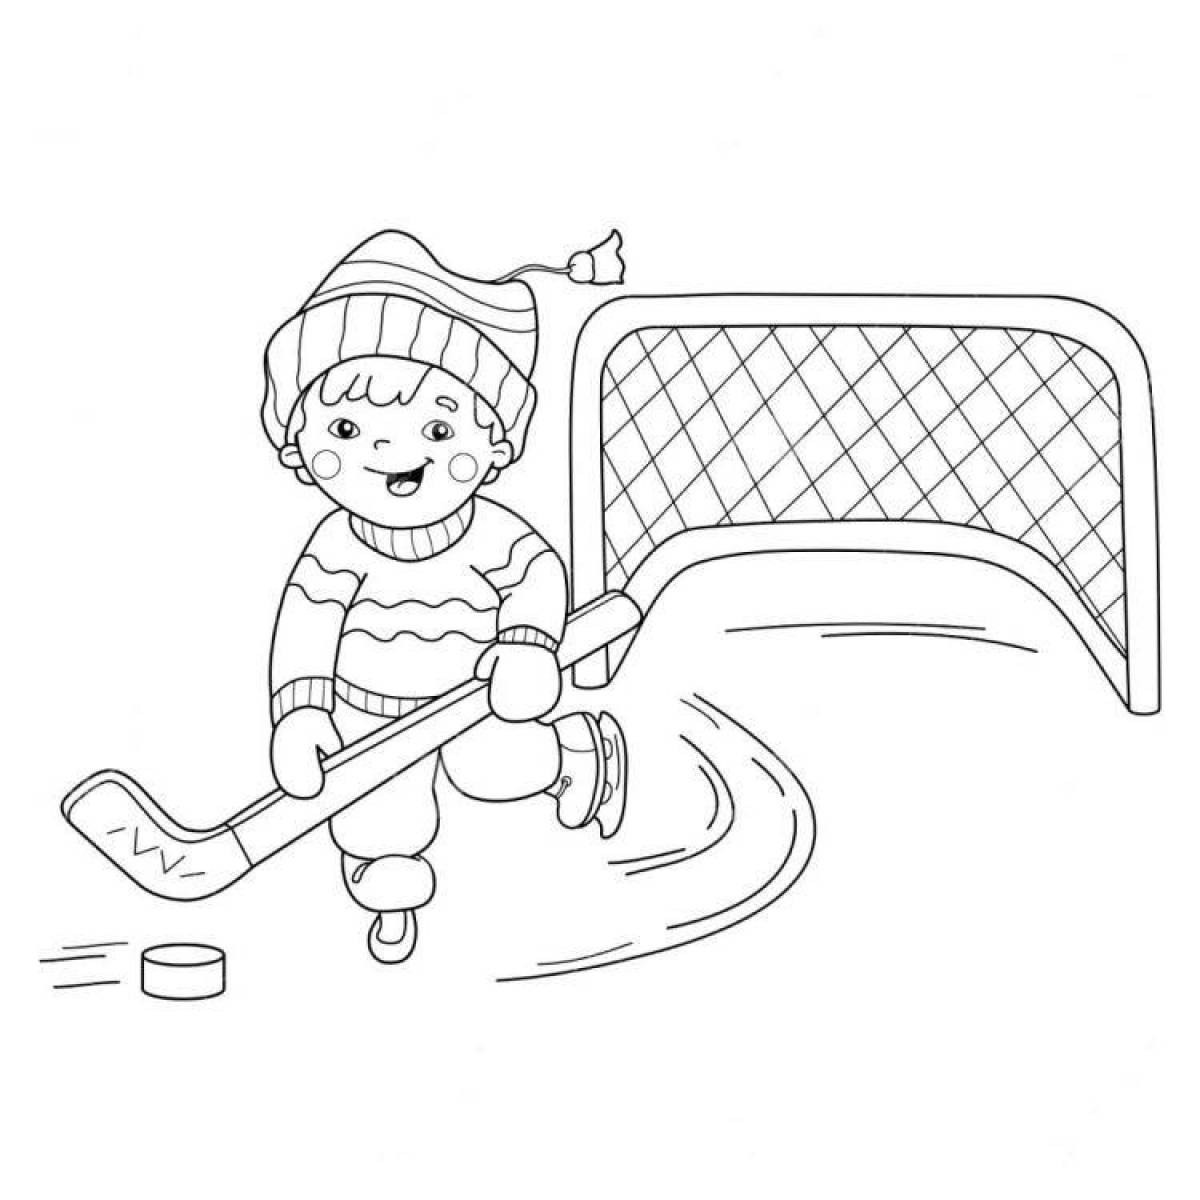 Colouring funny winter sports